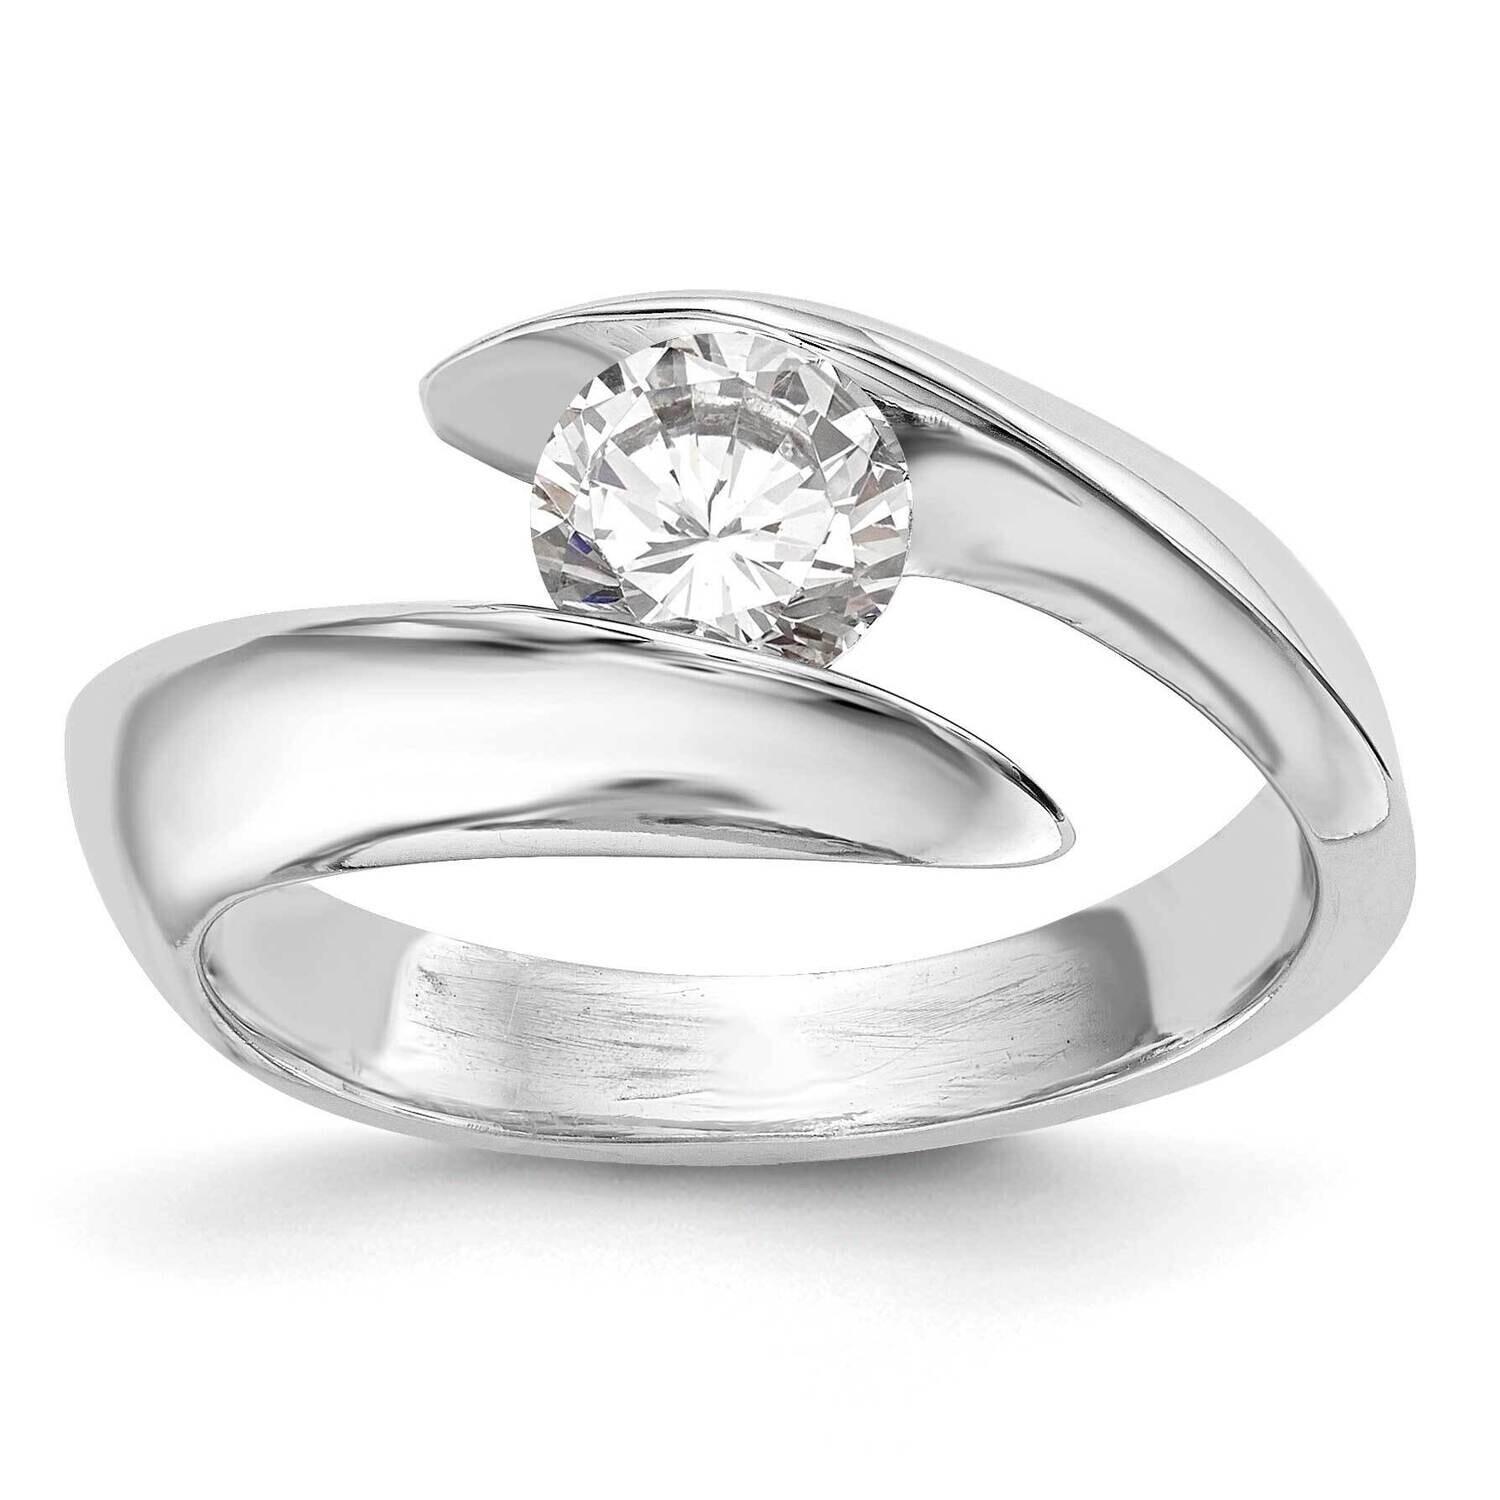 Holds 1/2 Carat 5.2mm Round Half-Bezel Bypass Solitaire Engagement Ring Mounting 14k White Gold RM2023E-CWAA